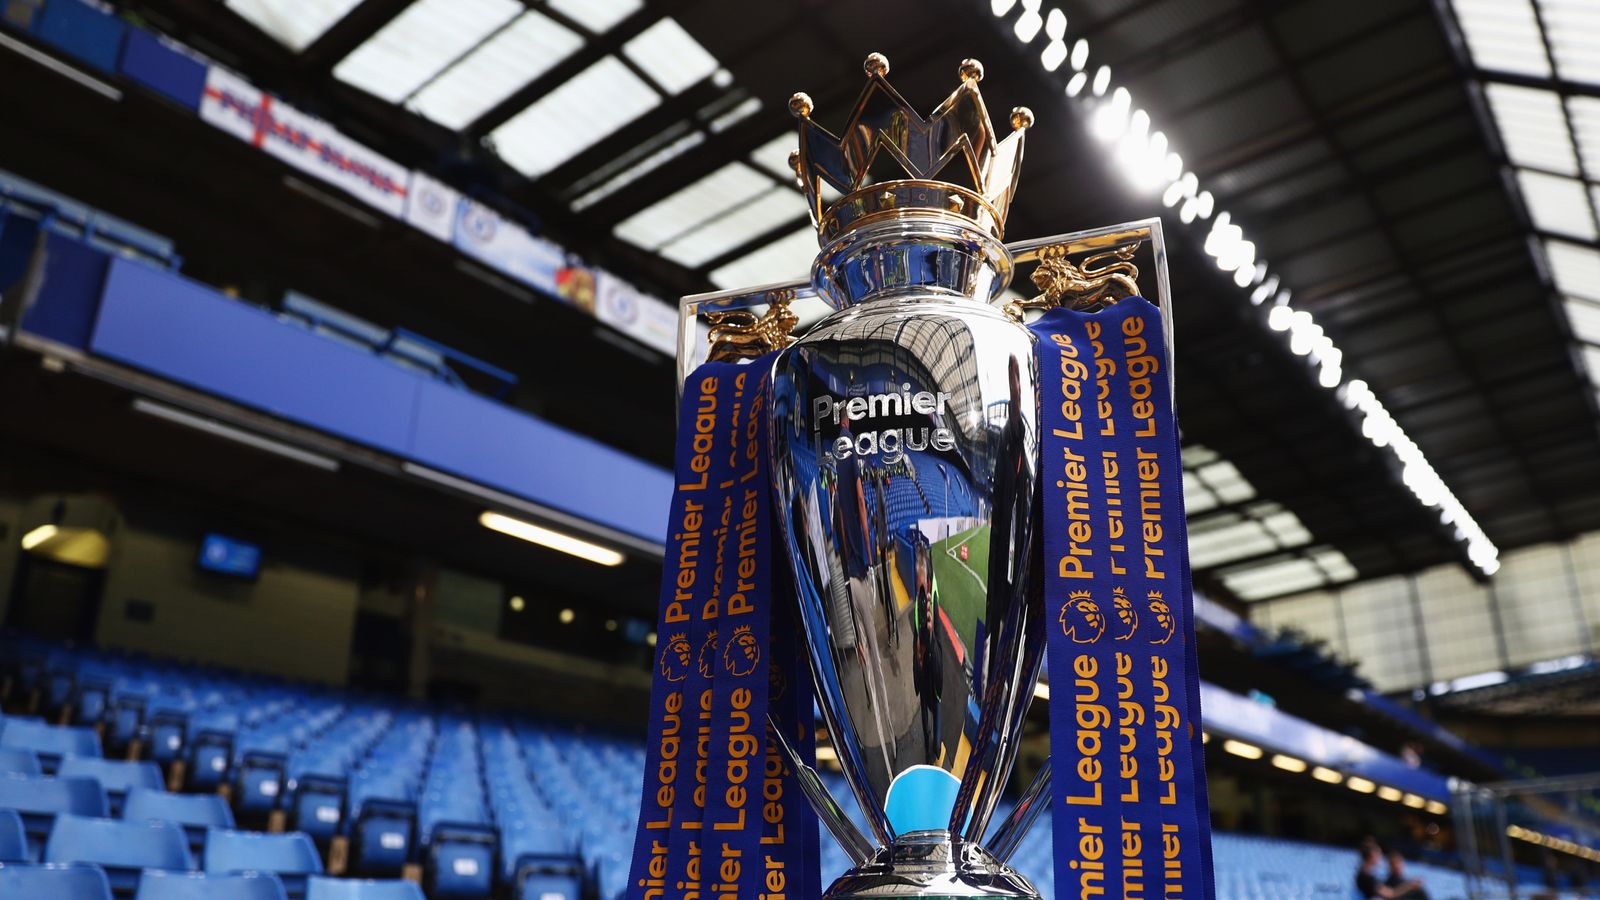 Economy sees rebound in January helped by return of Premier League football